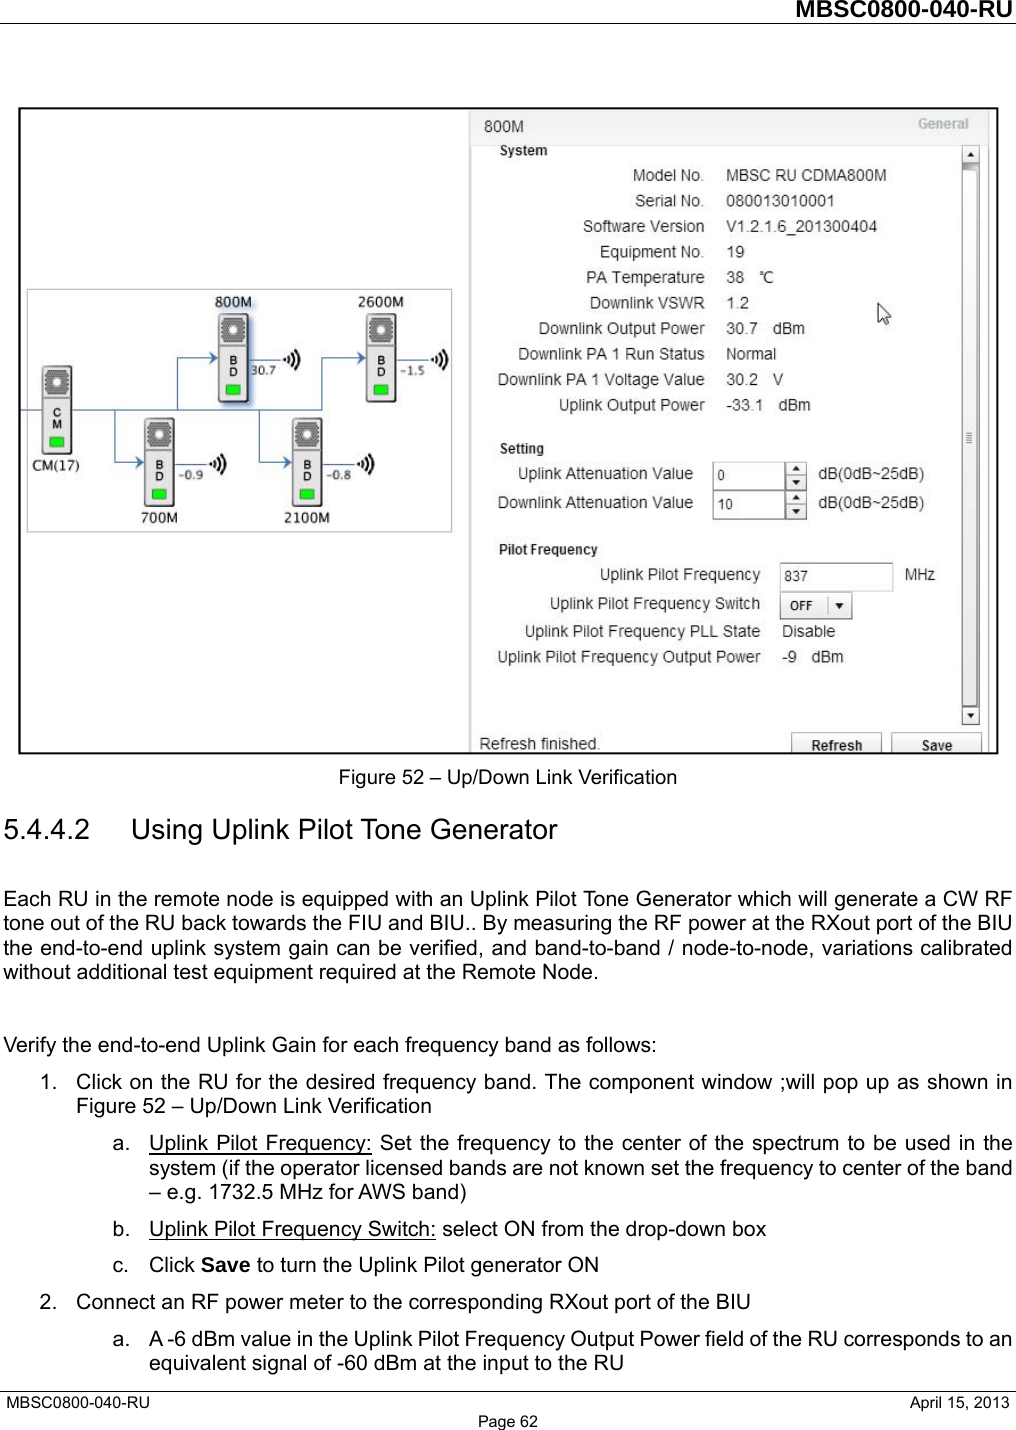         MBSC0800-040-RU   MBSC0800-040-RU                                                   April 15, 2013 Page 62  Figure 52 – Up/Down Link Verification 5.4.4.2 Using Uplink Pilot Tone Generator Each RU in the remote node is equipped with an Uplink Pilot Tone Generator which will generate a CW RF tone out of the RU back towards the FIU and BIU.. By measuring the RF power at the RXout port of the BIU the end-to-end uplink system gain can be verified, and band-to-band / node-to-node, variations calibrated without additional test equipment required at the Remote Node.  Verify the end-to-end Uplink Gain for each frequency band as follows: 1.  Click on the RU for the desired frequency band. The component window ;will pop up as shown in Figure 52 – Up/Down Link Verification a. Uplink Pilot Frequency: Set the frequency to the center of the spectrum to be used in the system (if the operator licensed bands are not known set the frequency to center of the band – e.g. 1732.5 MHz for AWS band) b. Uplink Pilot Frequency Switch: select ON from the drop-down box c. Click Save to turn the Uplink Pilot generator ON 2.  Connect an RF power meter to the corresponding RXout port of the BIU a.  A -6 dBm value in the Uplink Pilot Frequency Output Power field of the RU corresponds to an equivalent signal of -60 dBm at the input to the RU 